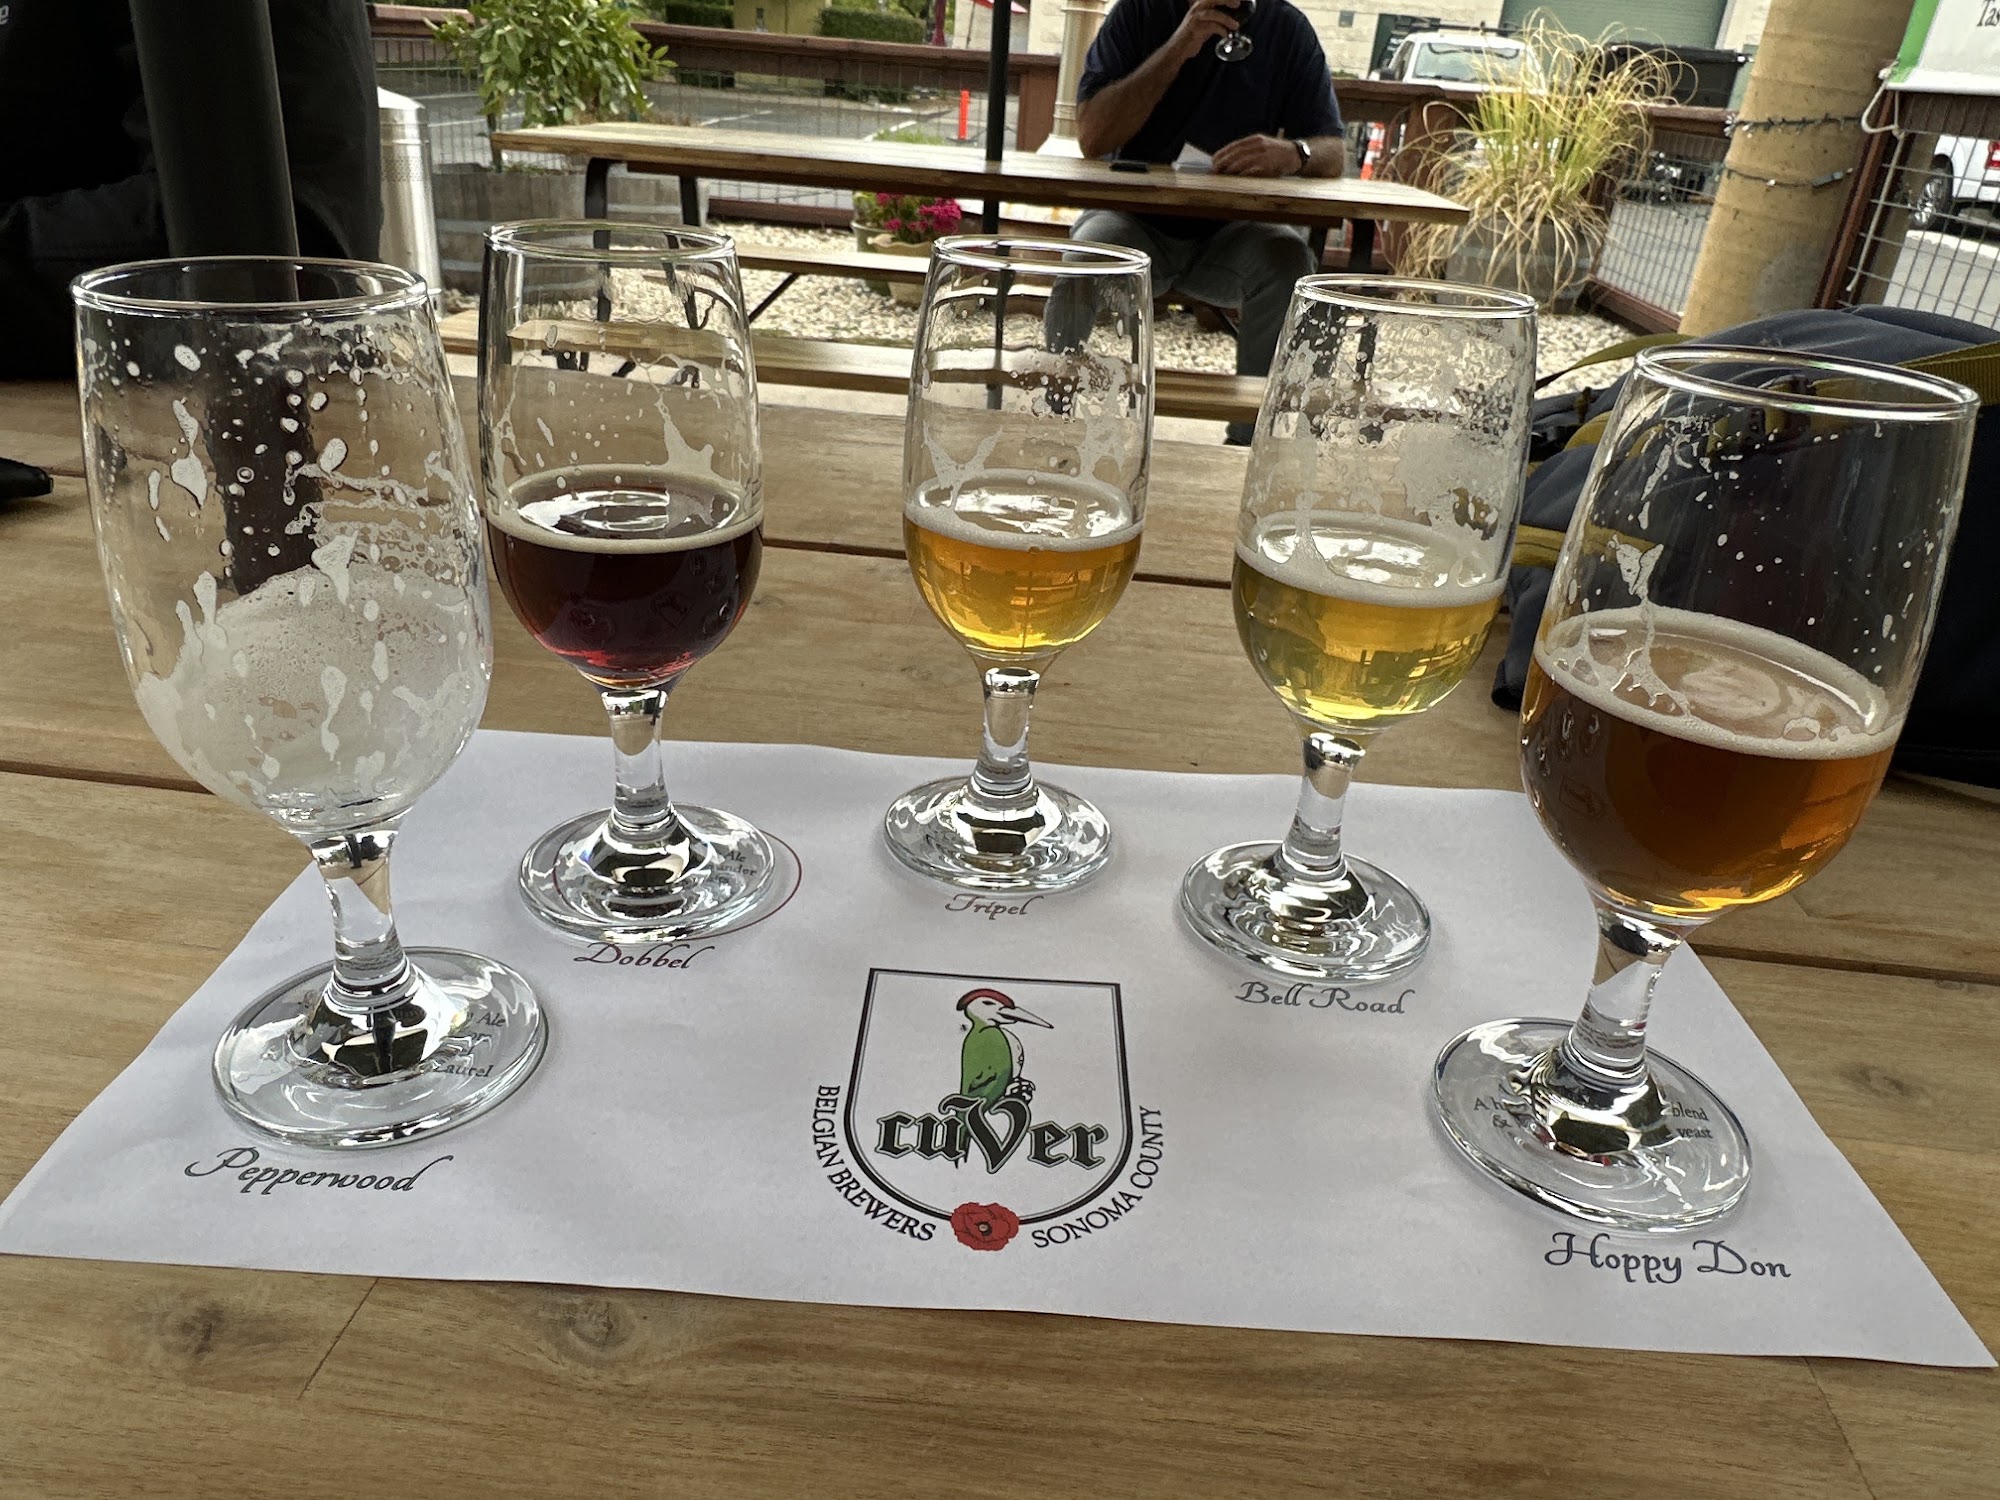 CUVER Belgian Brewers